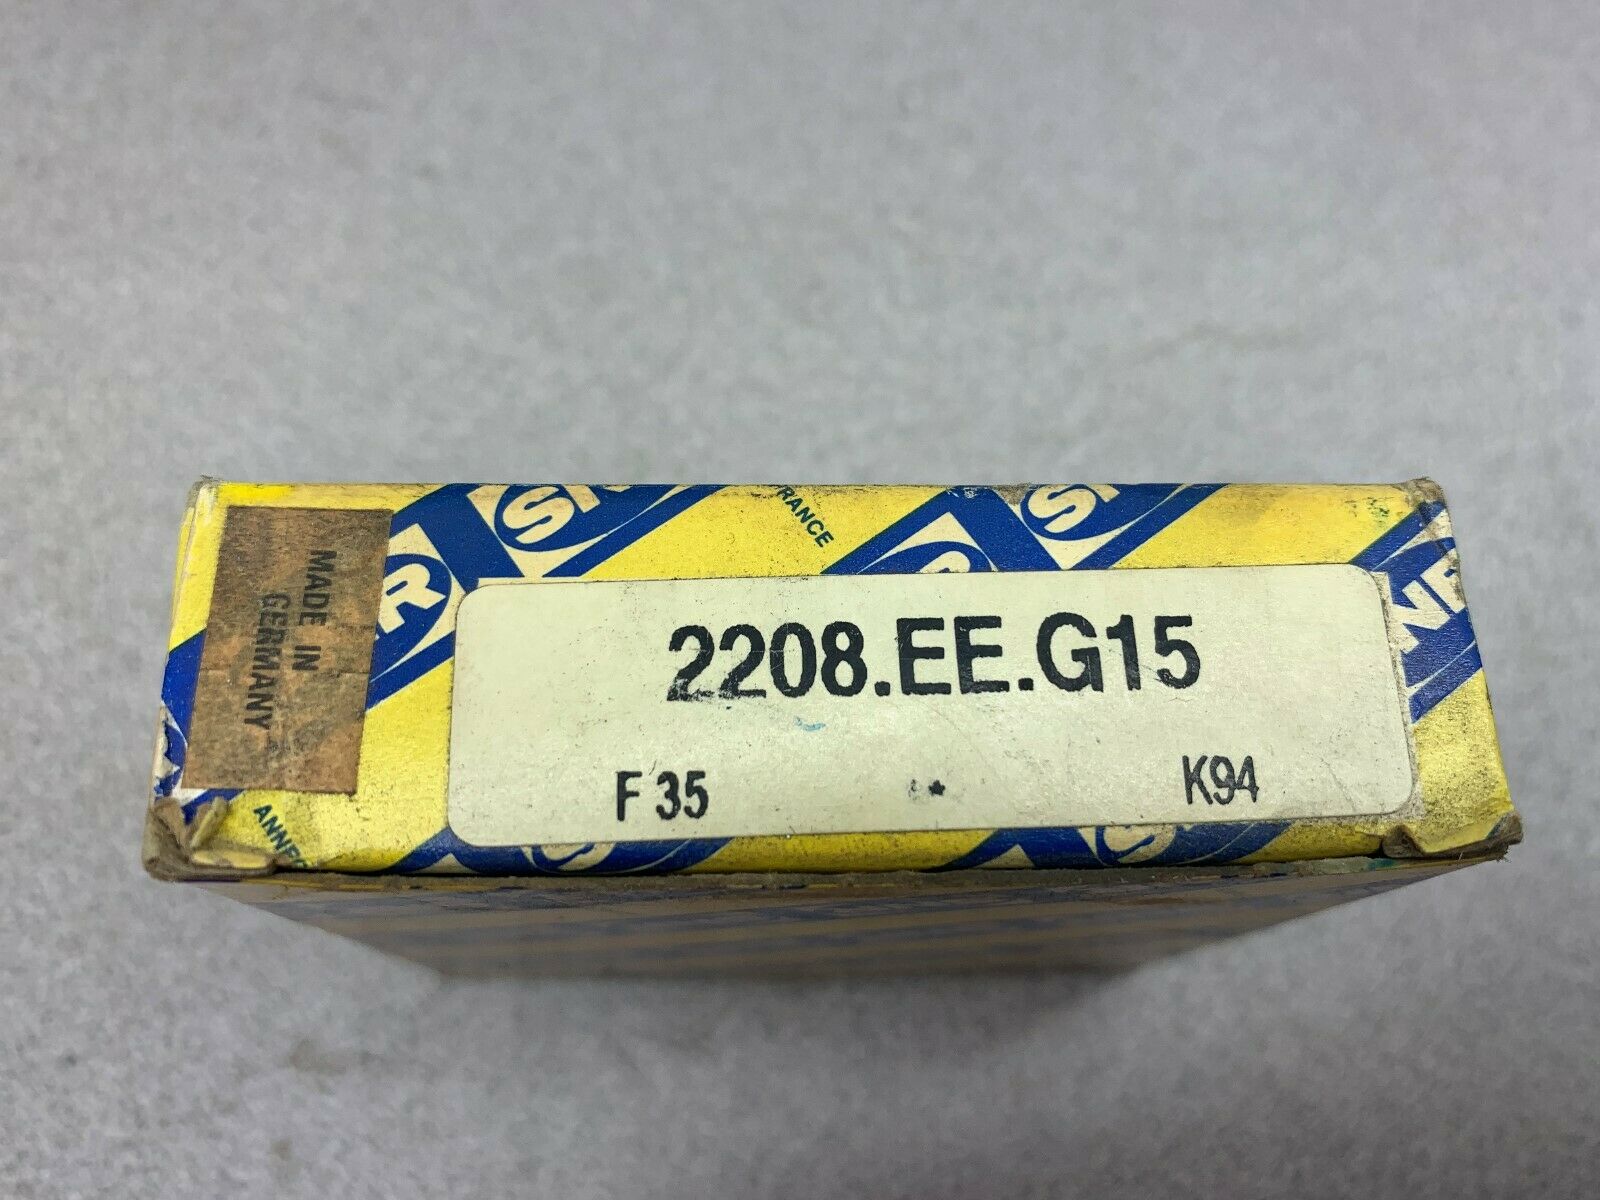 NEW IN BOX SNR BEARING 2208.EE.G15